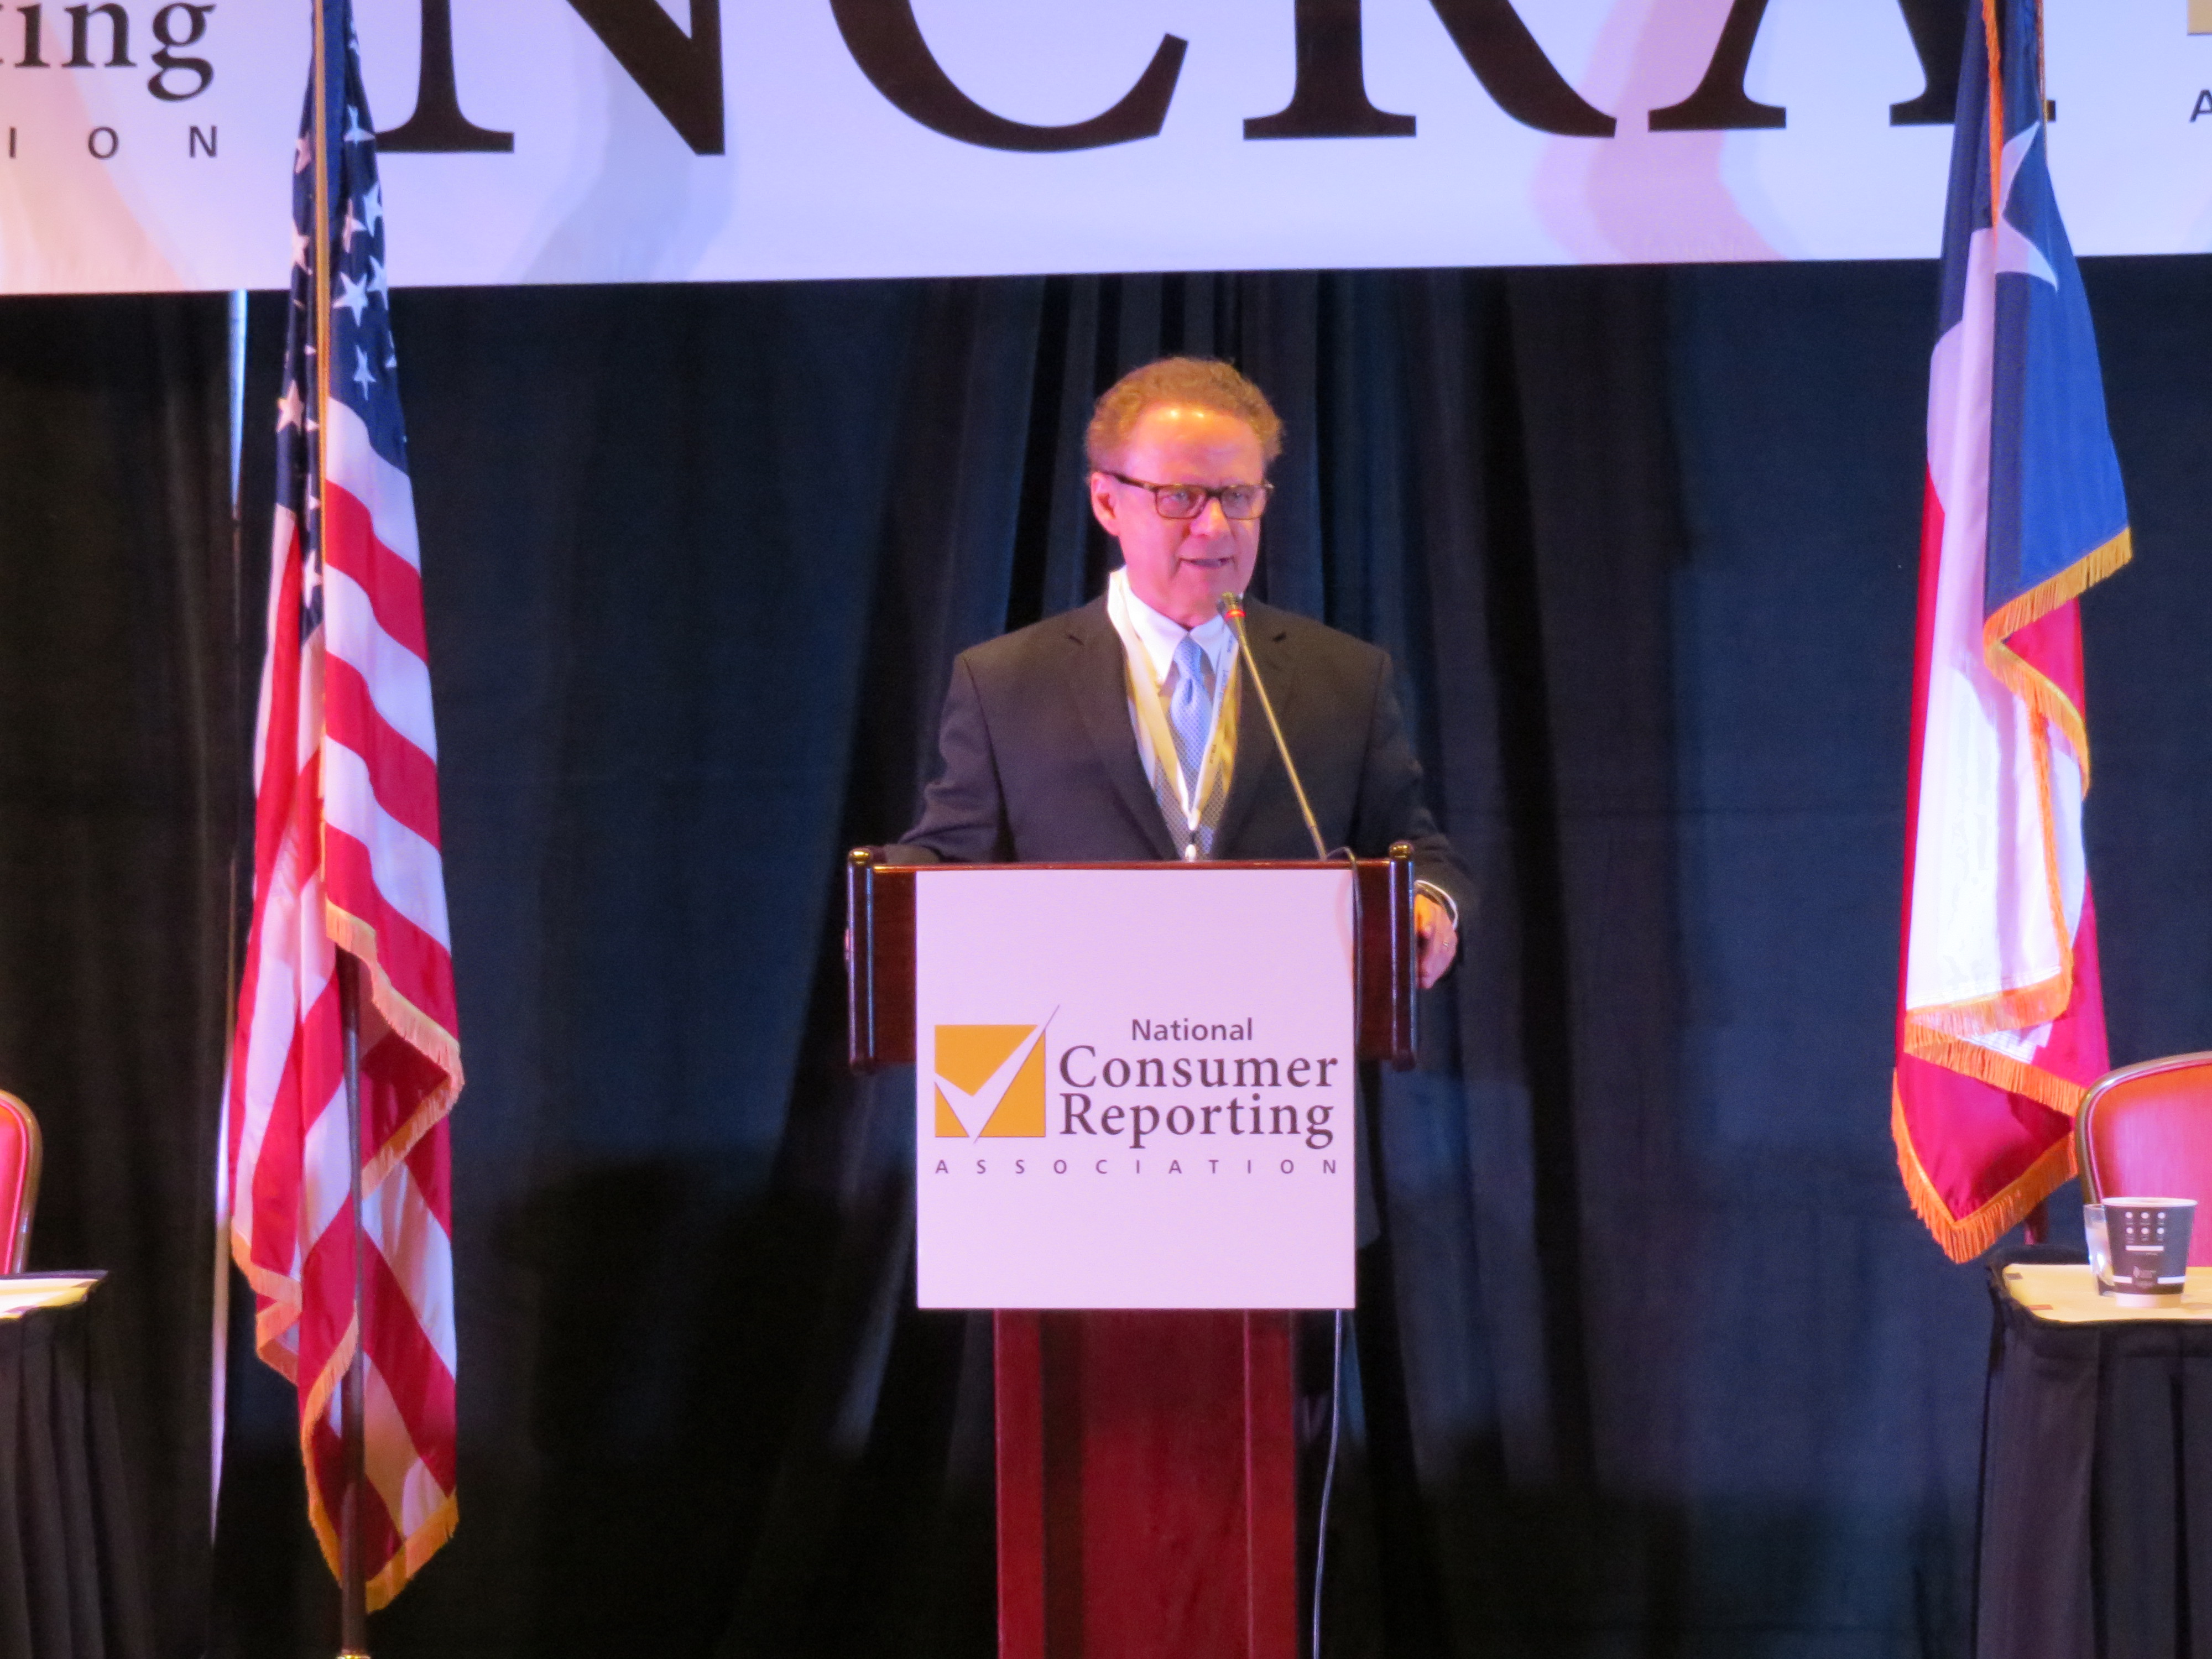 Sonny Melendrez served as emcee for the NCRA’s Annual Conference